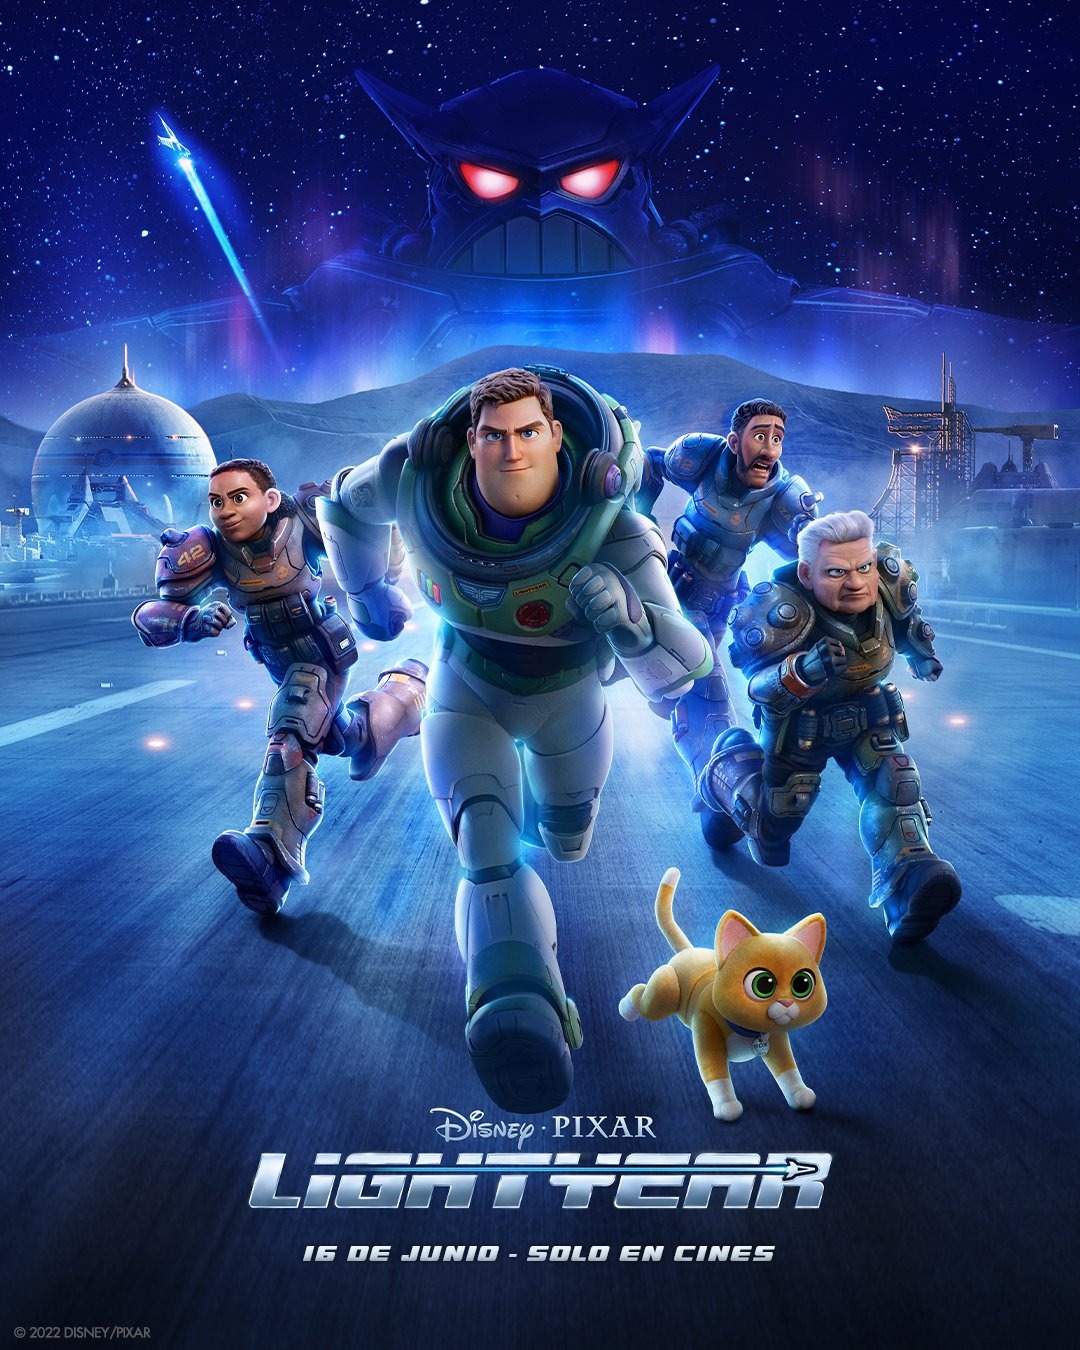 Extra Large Movie Poster Image for Lightyear (#5 of 14)